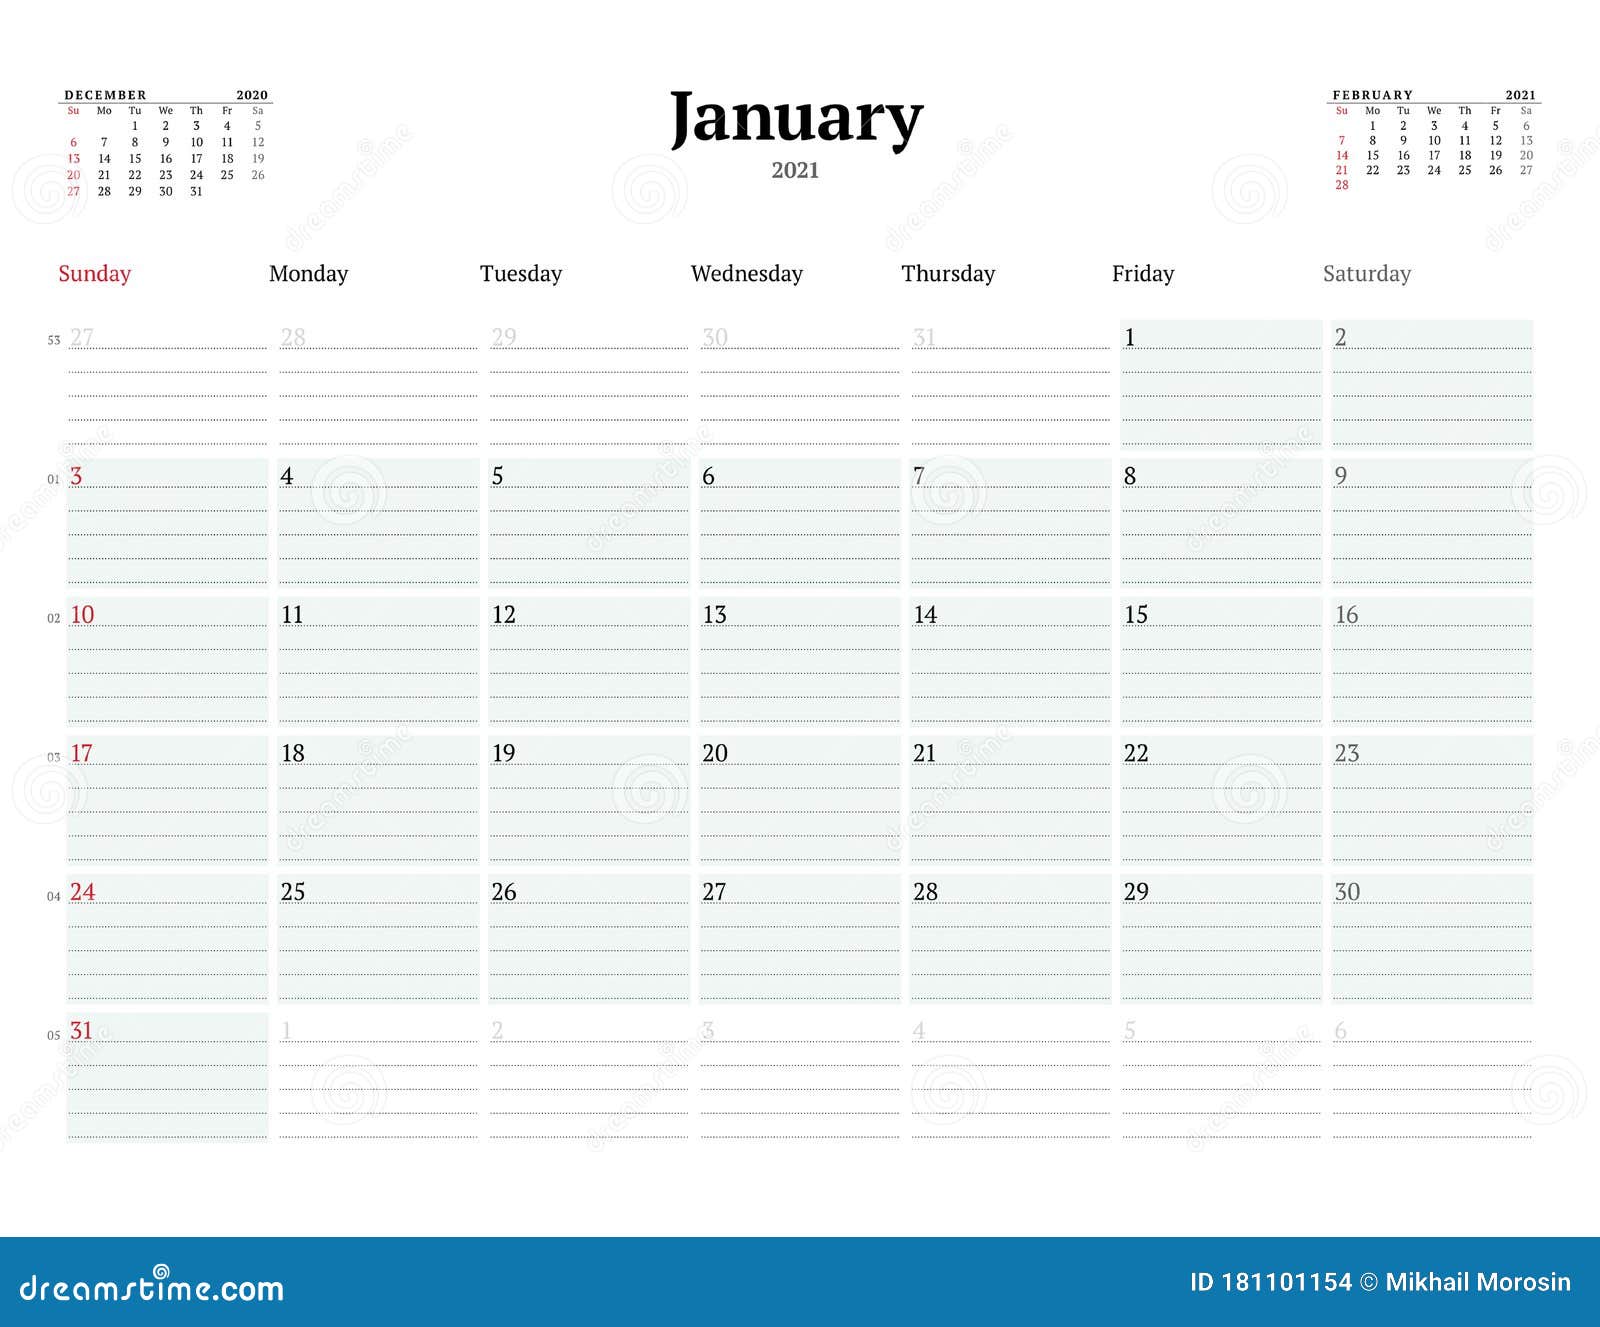 31+ January 2021 Free Printable Calendar 2021 Monthly Images